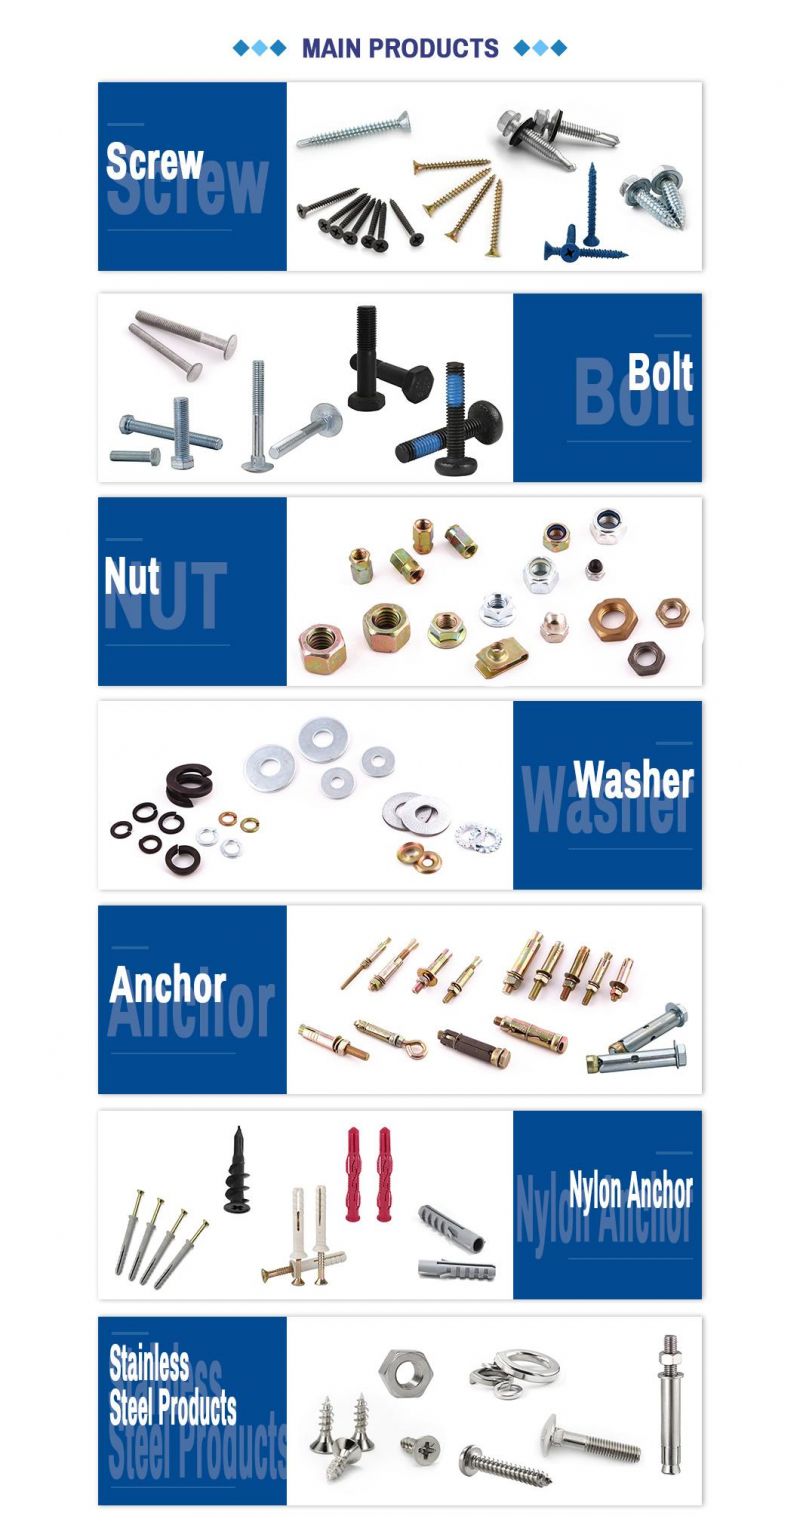 Hexagonal Washer Head Self-Drilling Screw with EPDM Washer